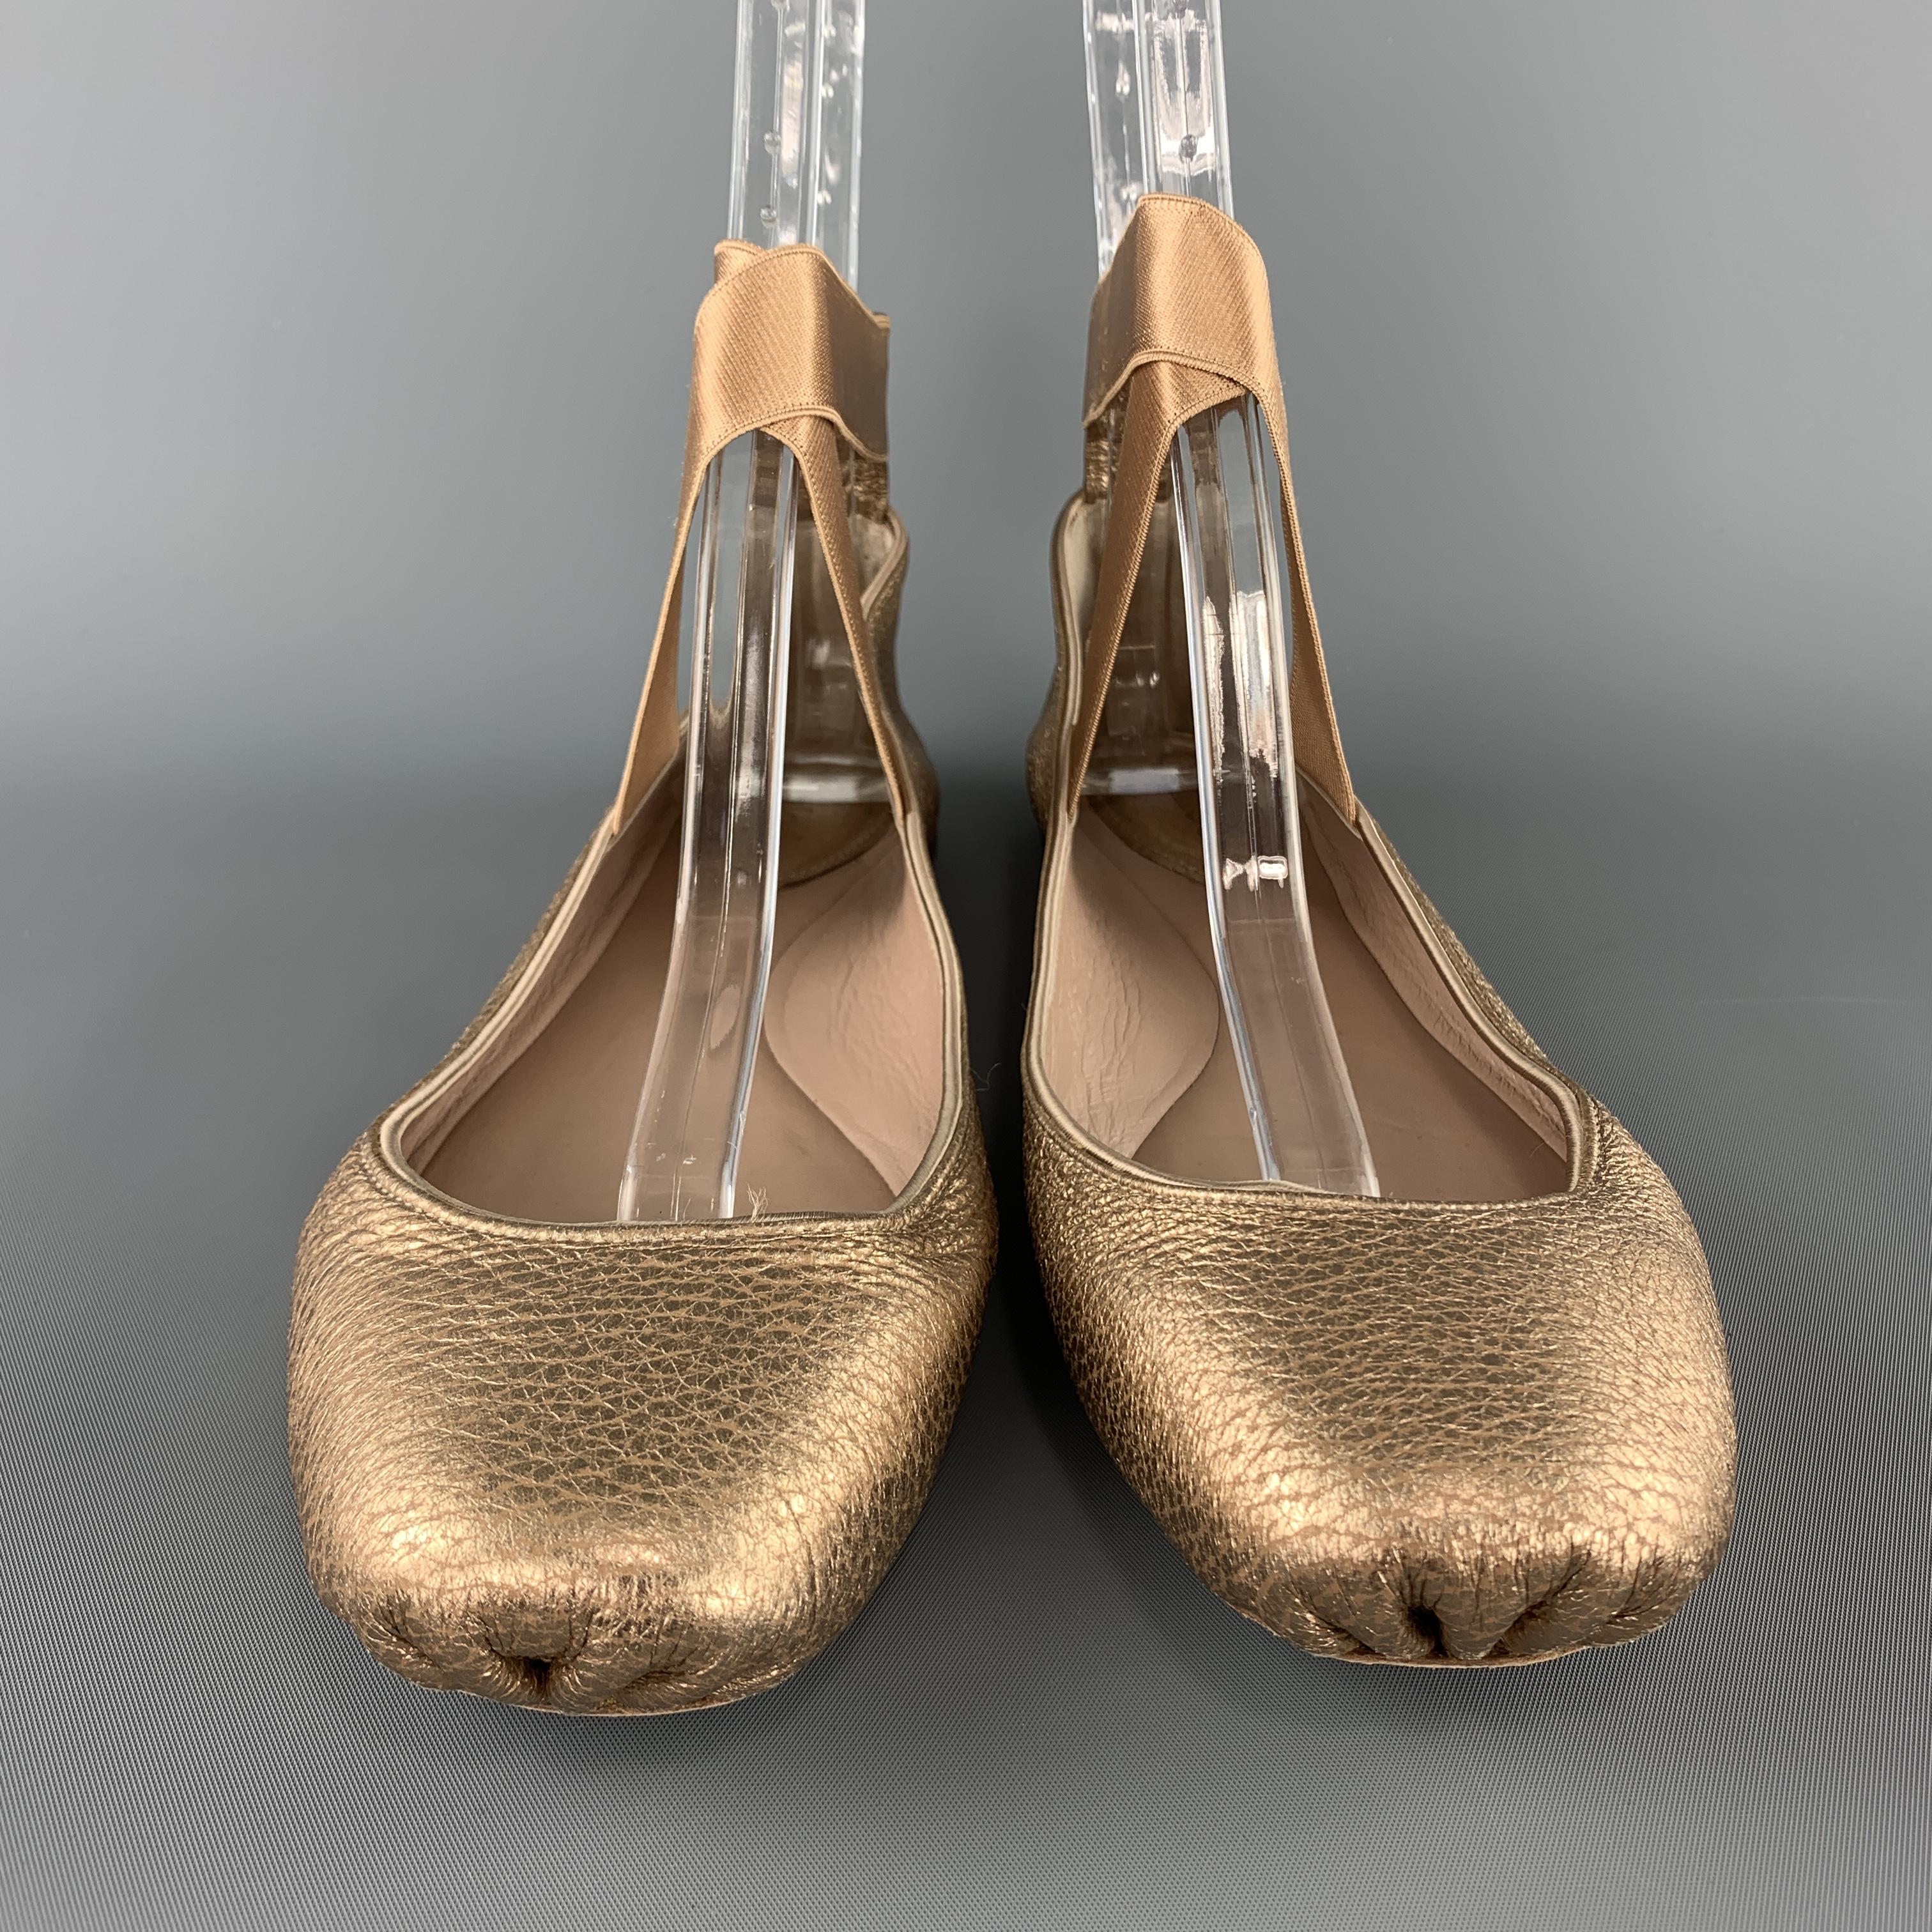 CHLOE ballet flats come in metallic rose gold textured leather with an elastic strap. Made in Italy.

Excellent Pre-Owned Condition.
Marked: IT 40

Outsole: 10.5 x 3.5 in.